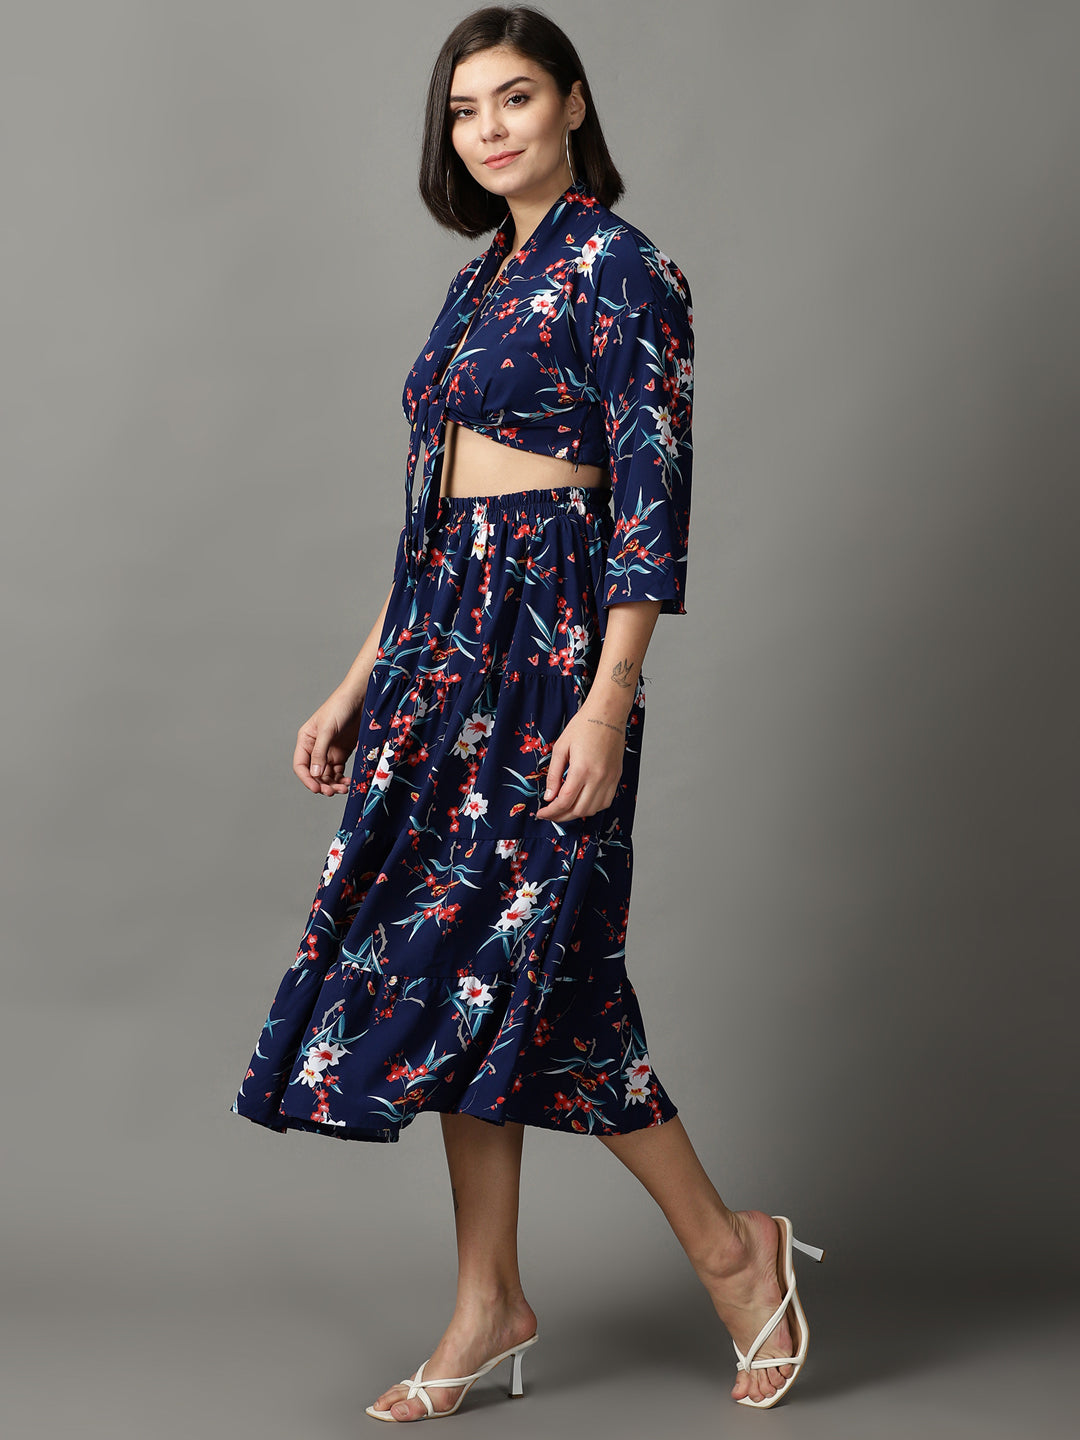 Women's Navy Blue Printed Co-Ords